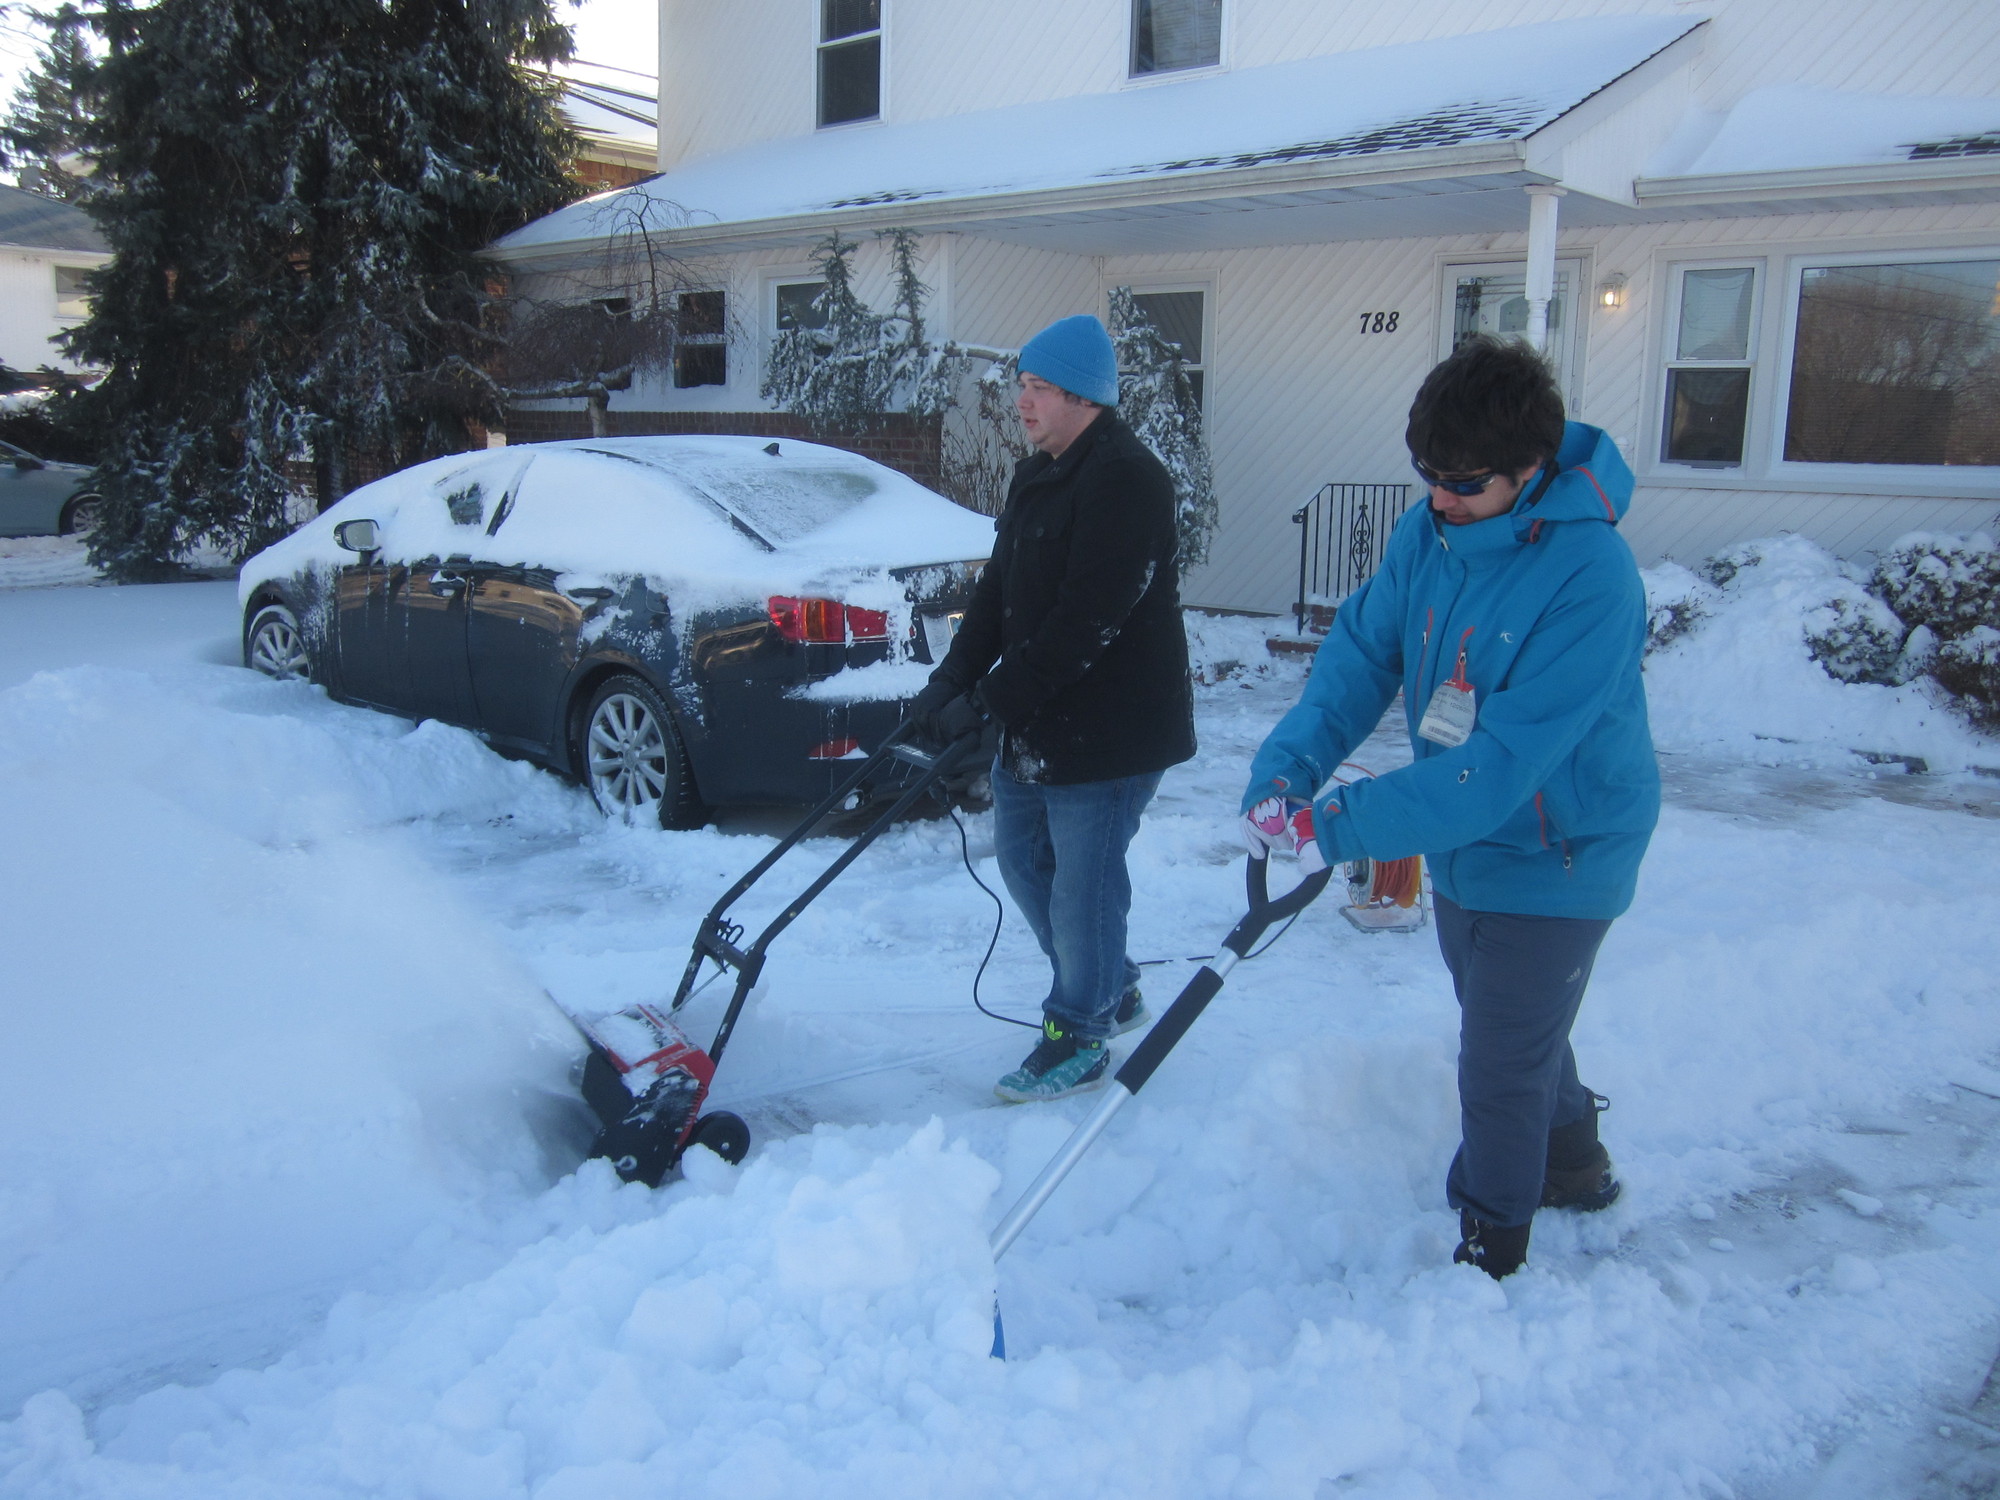 Brothers James and Paul Sarris shoveled their Merrick Avenue home.